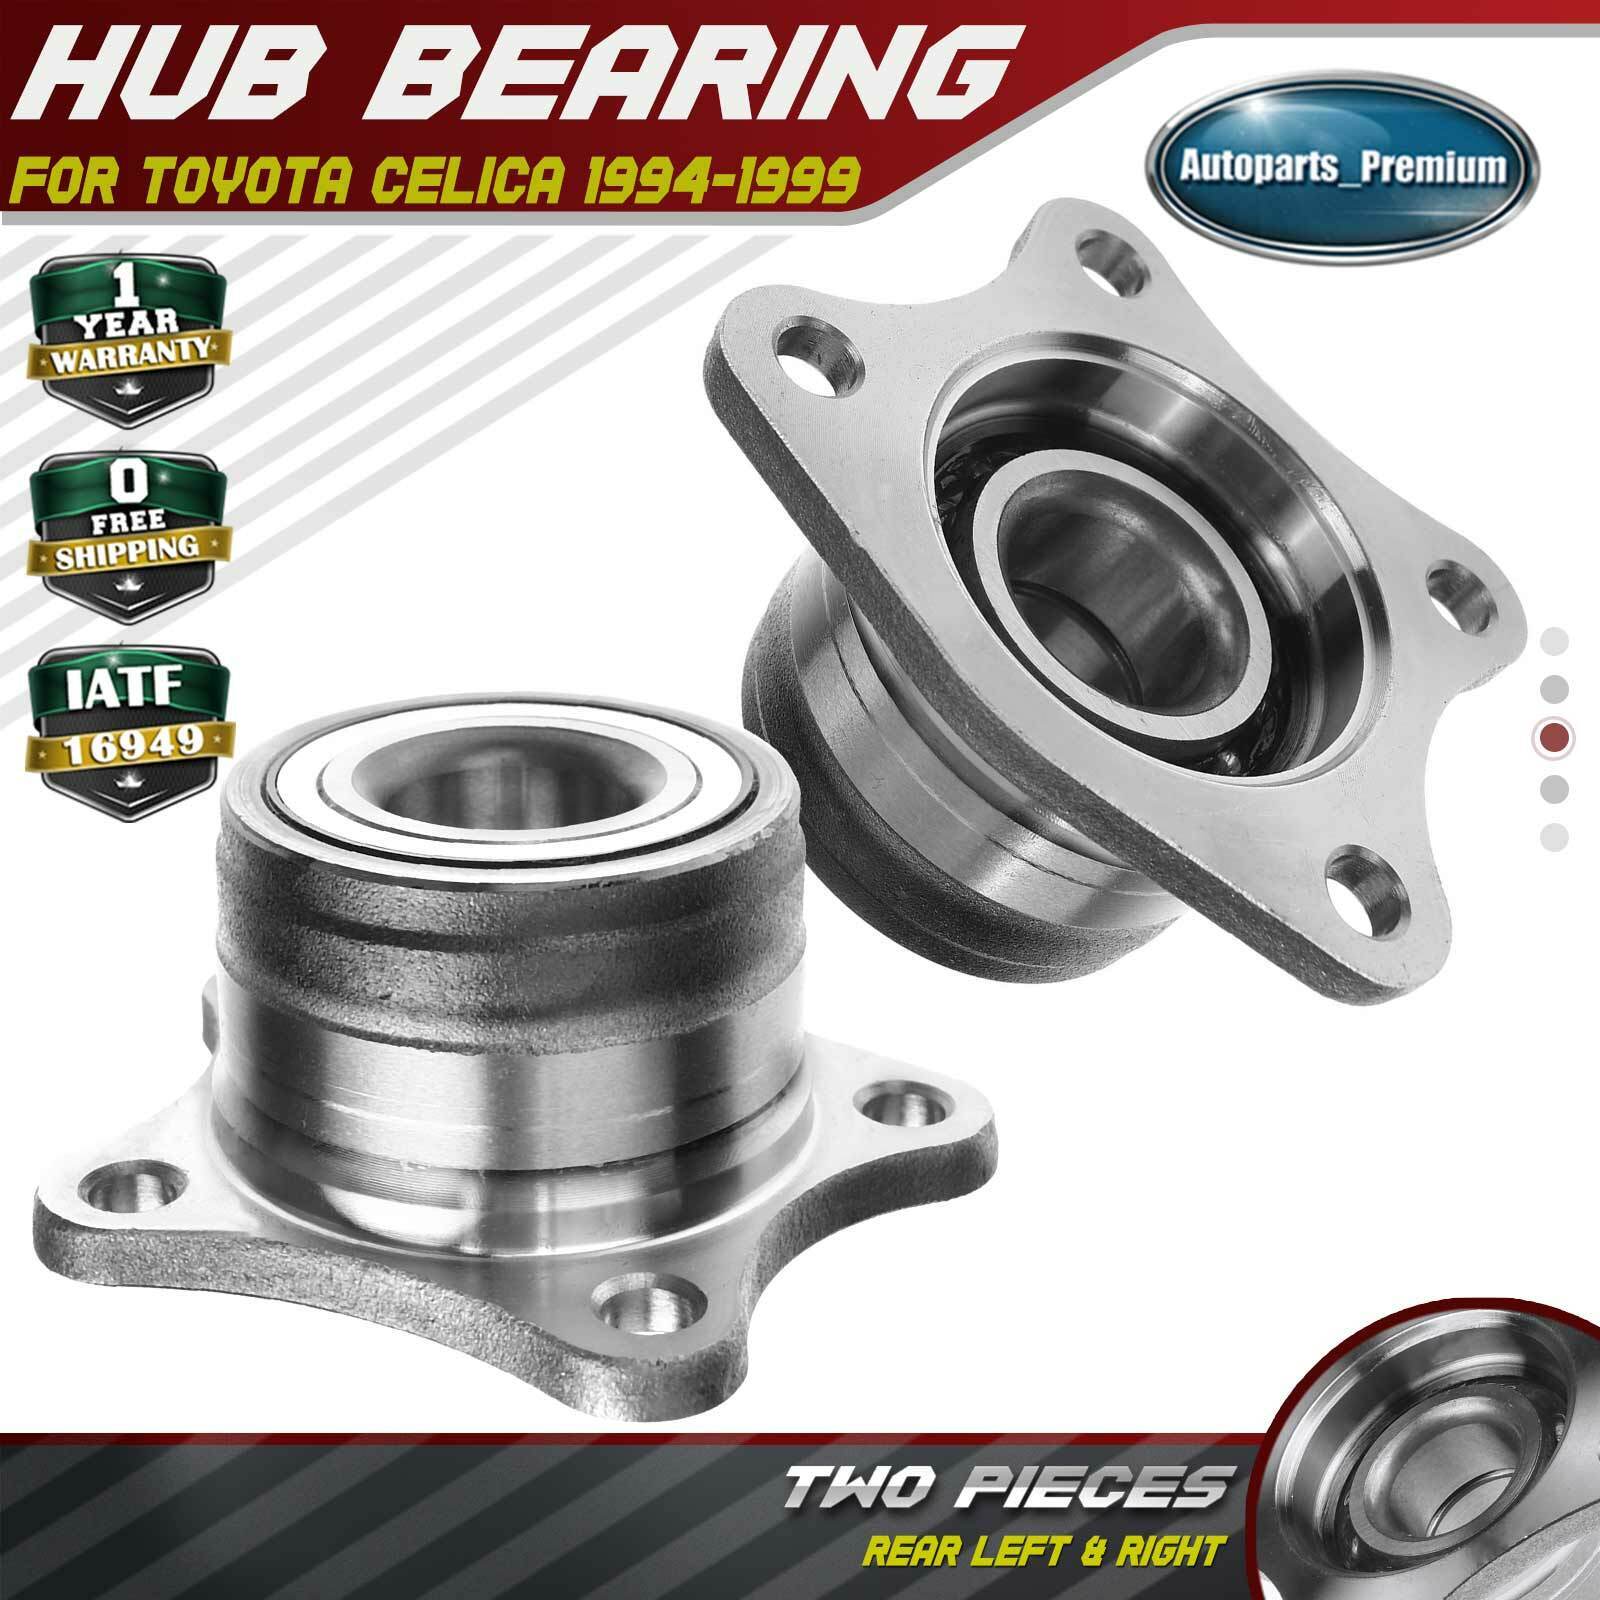 2x Wheel Hub Bearing Assembly for Toyota Celica 1994-1999 Rear Left and Right